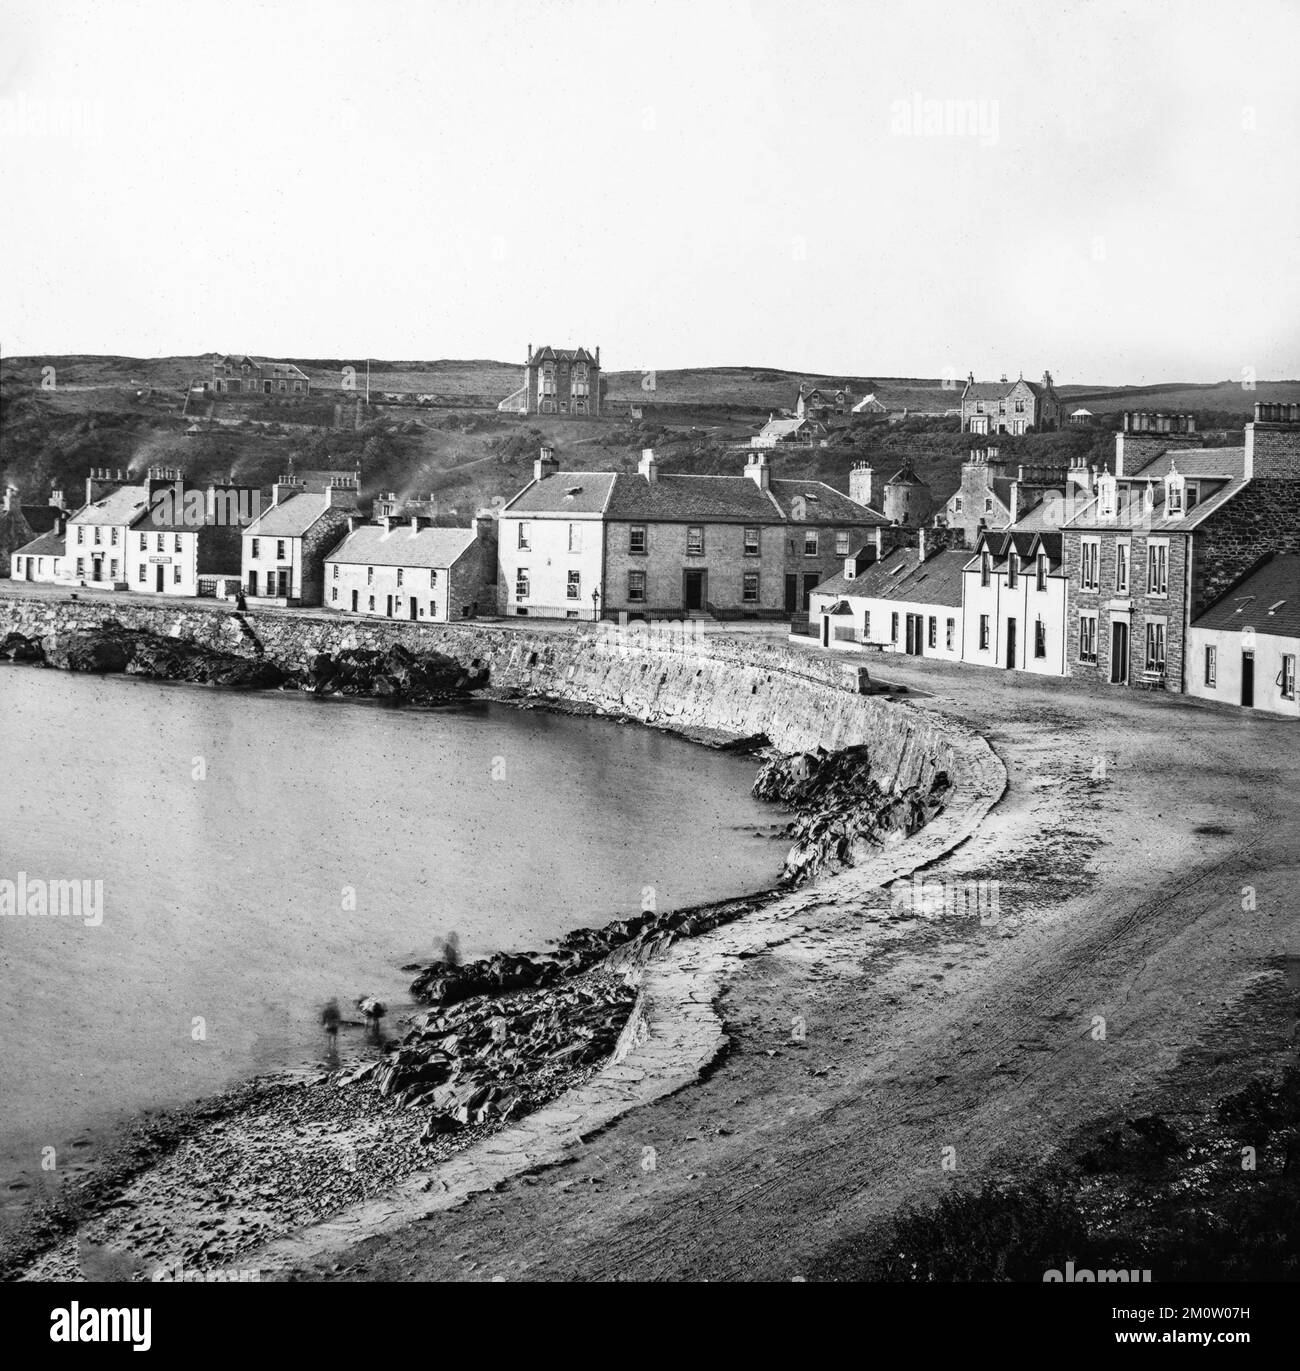 Early 20th century vintage black and white photograph looking down on Shore Street in Portpatrick in Dumfries and Galloway in Scotland. Stock Photo